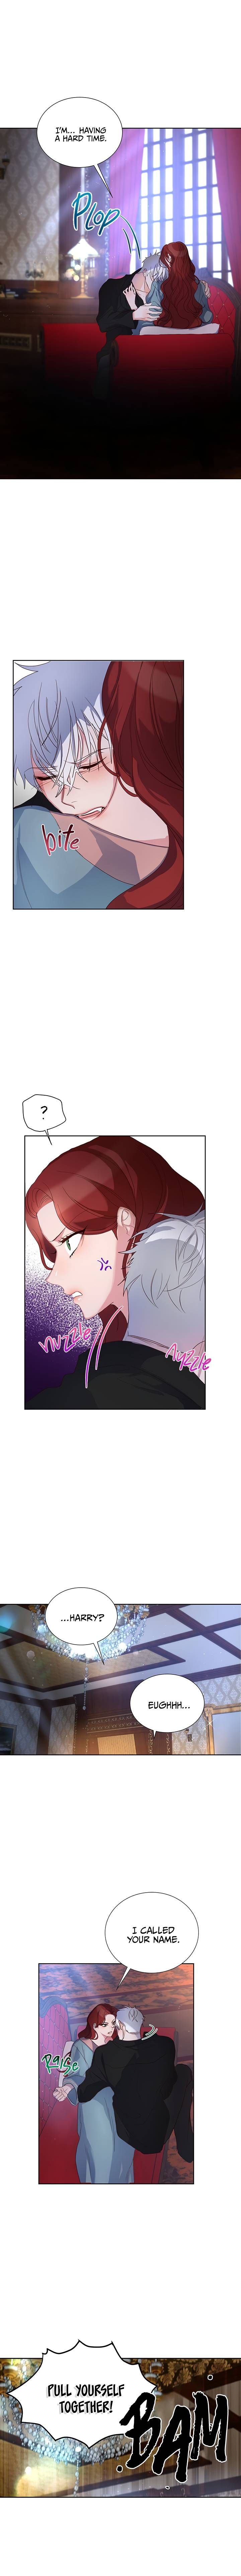 I’ll Just Live on as a Villainess Chapter 8 page 4